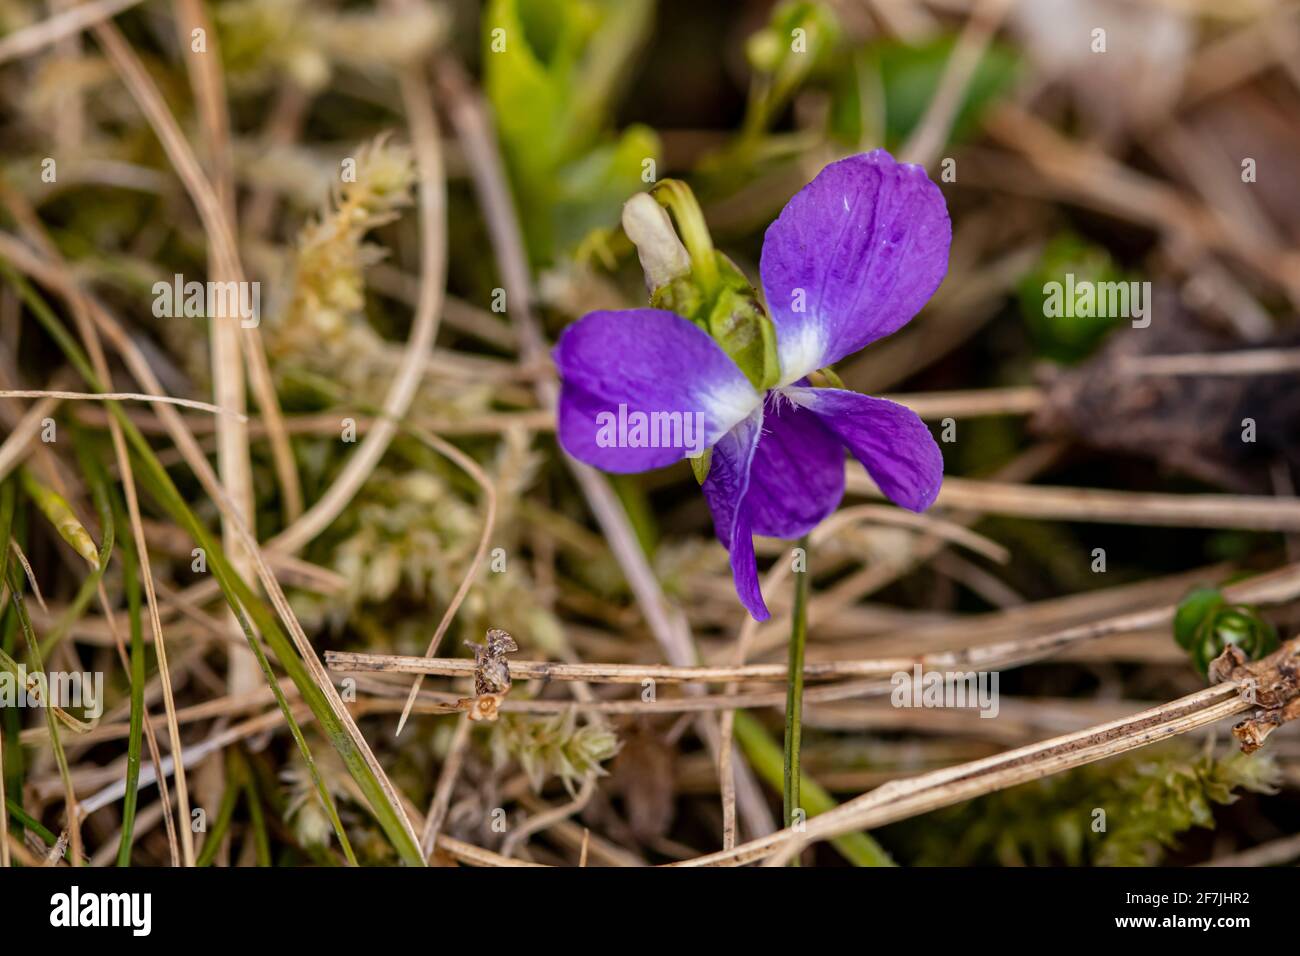 Hairy violet flower in the forest Stock Photo